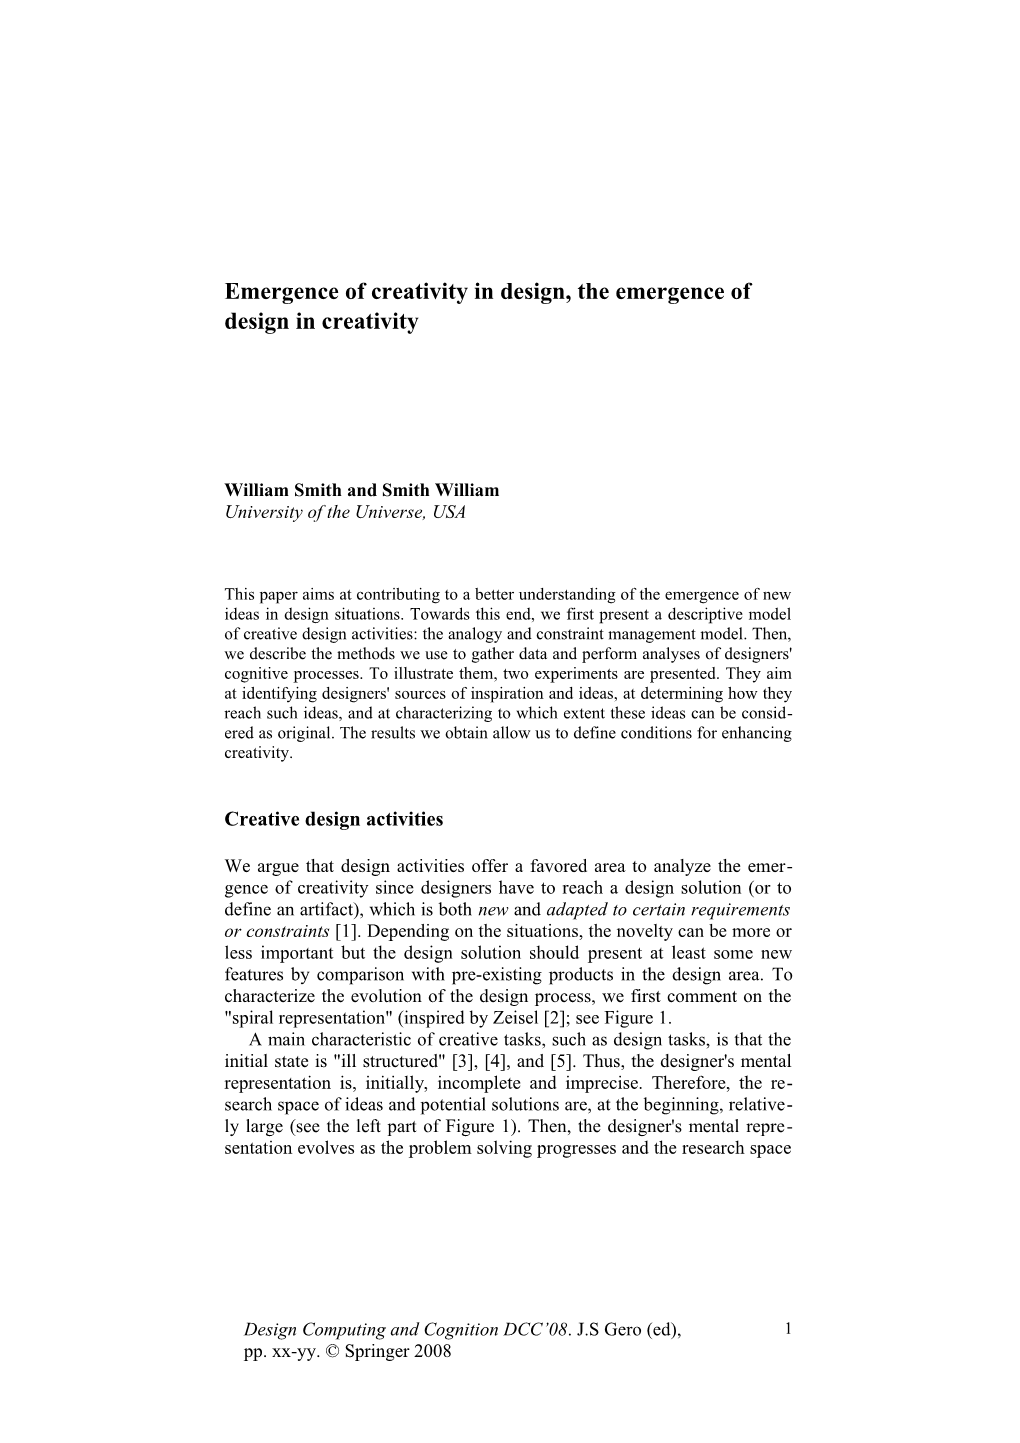 Emergence of Creativity in Design, the Emergence of Design in Creativity